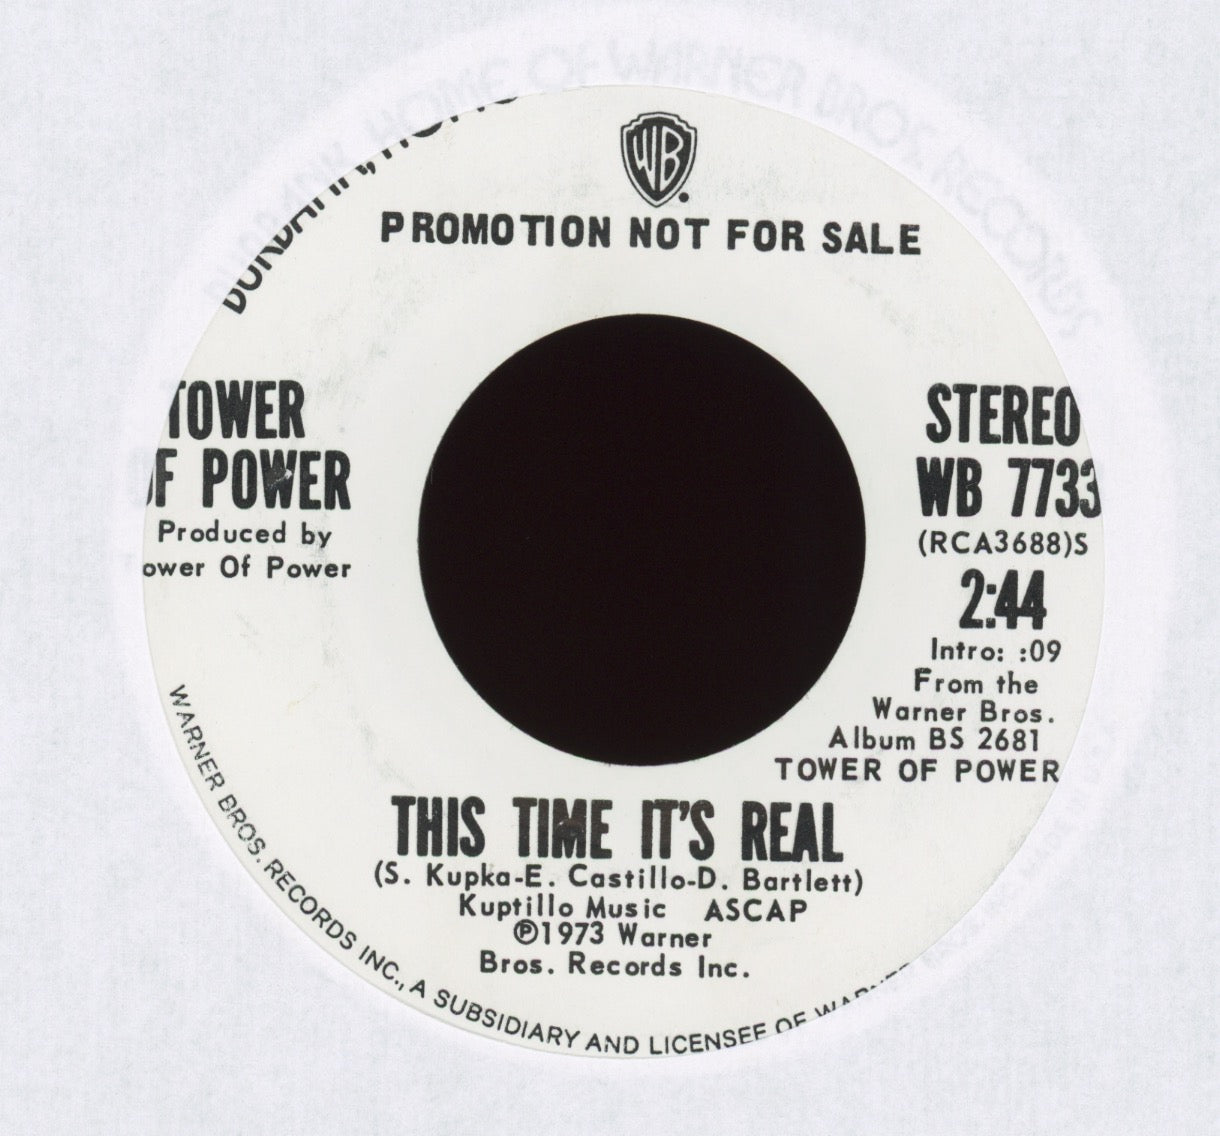 Tower Of Power - This Time It's Real on WB Promo